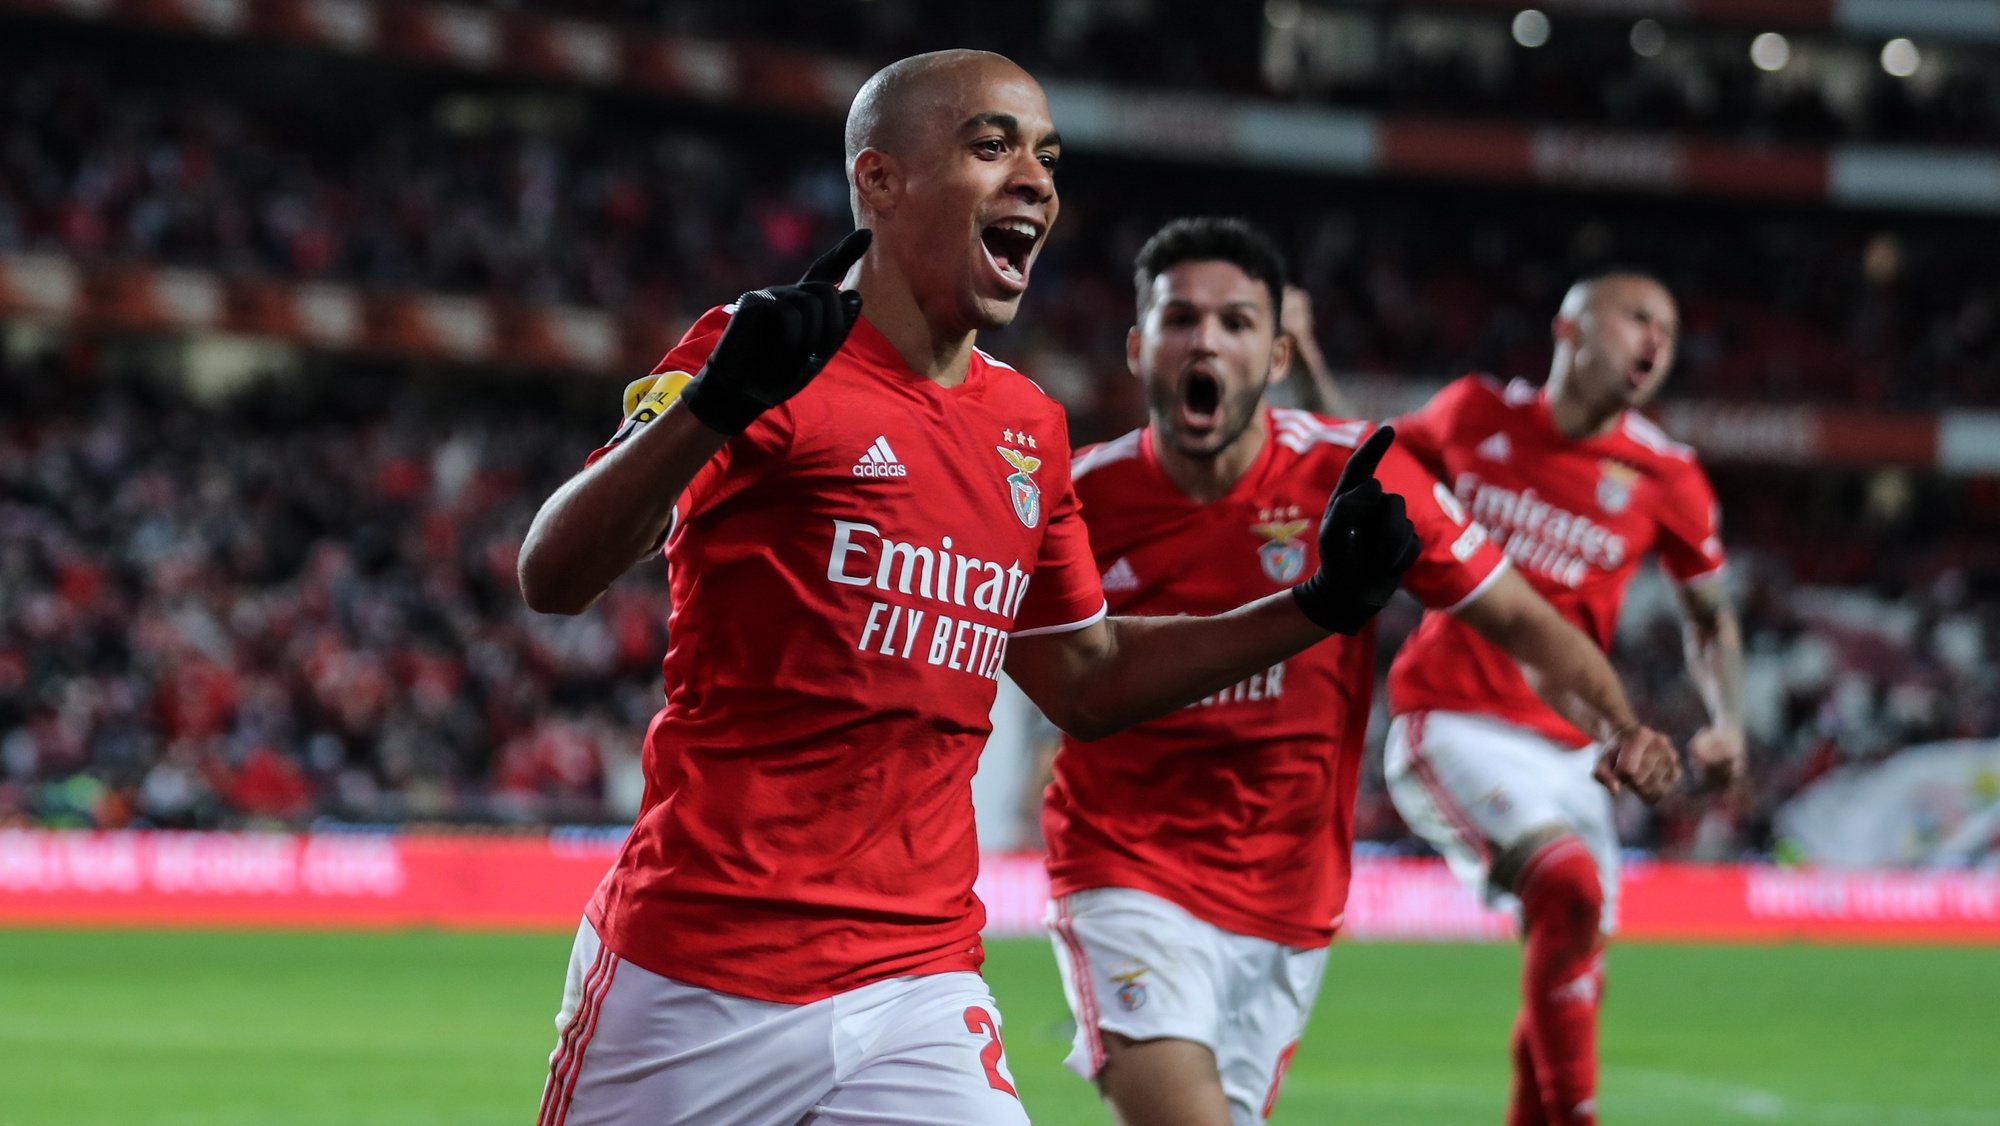 epa09676228 Benfica player Joao Mario celebrates after scoring a goal against Pacos de Ferreira during their Portuguese First League soccer match held at Luz Stadium, in Lisbon, Portugal, 9 January 2022.  EPA/MIGUEL A. LOPES